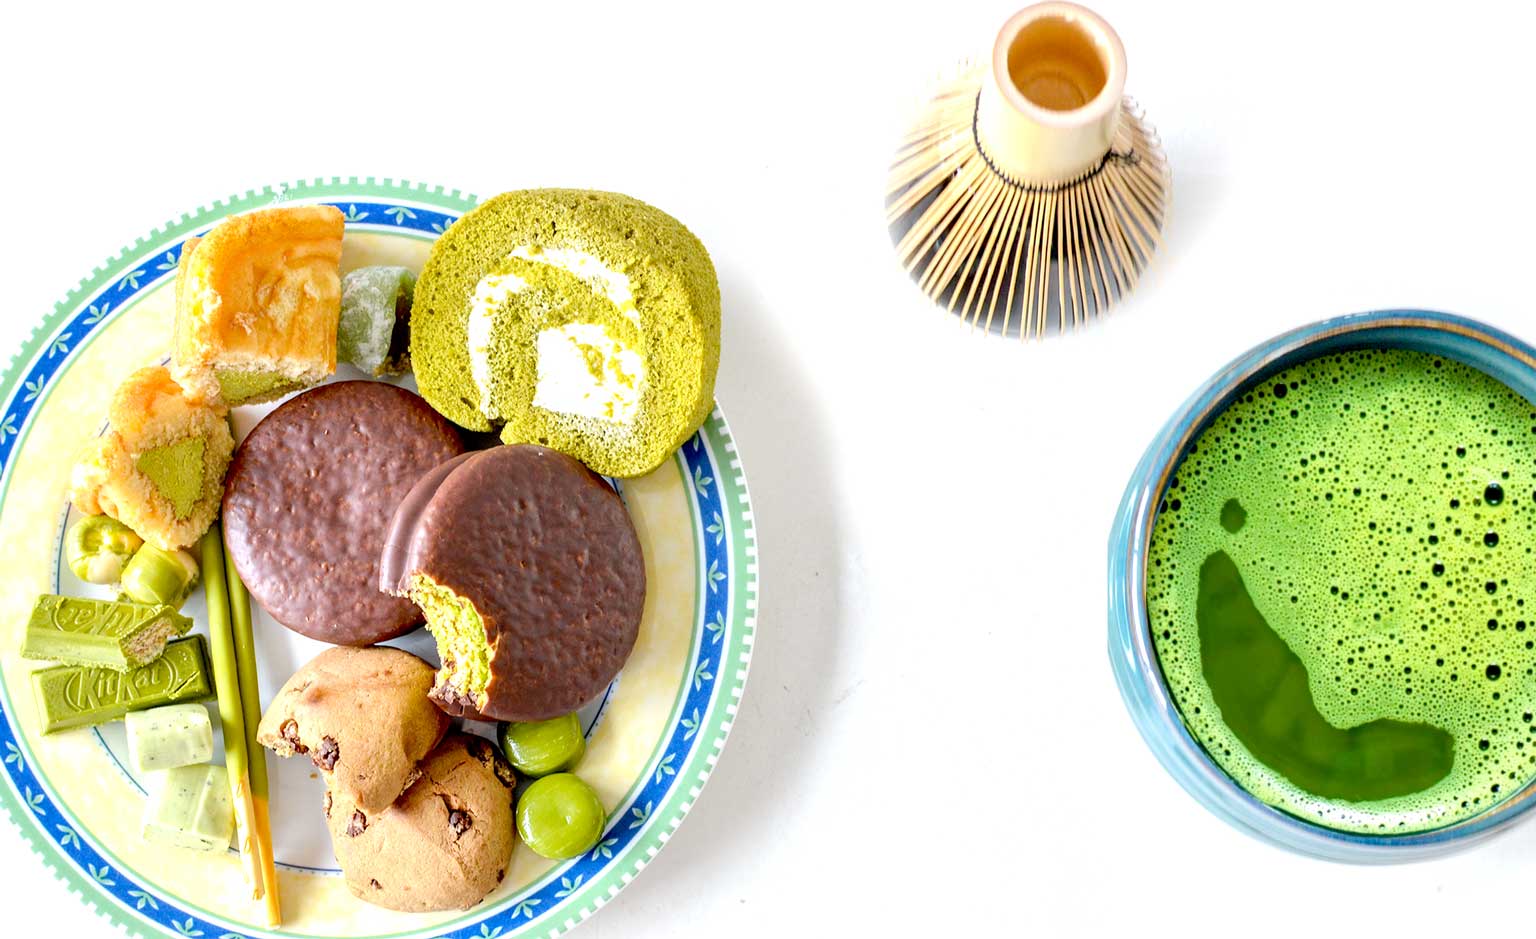 https://afternoonteareads.com/wp-content/uploads/2021/06/matcha-snacks-review-all-of-them-with-matcha.jpg